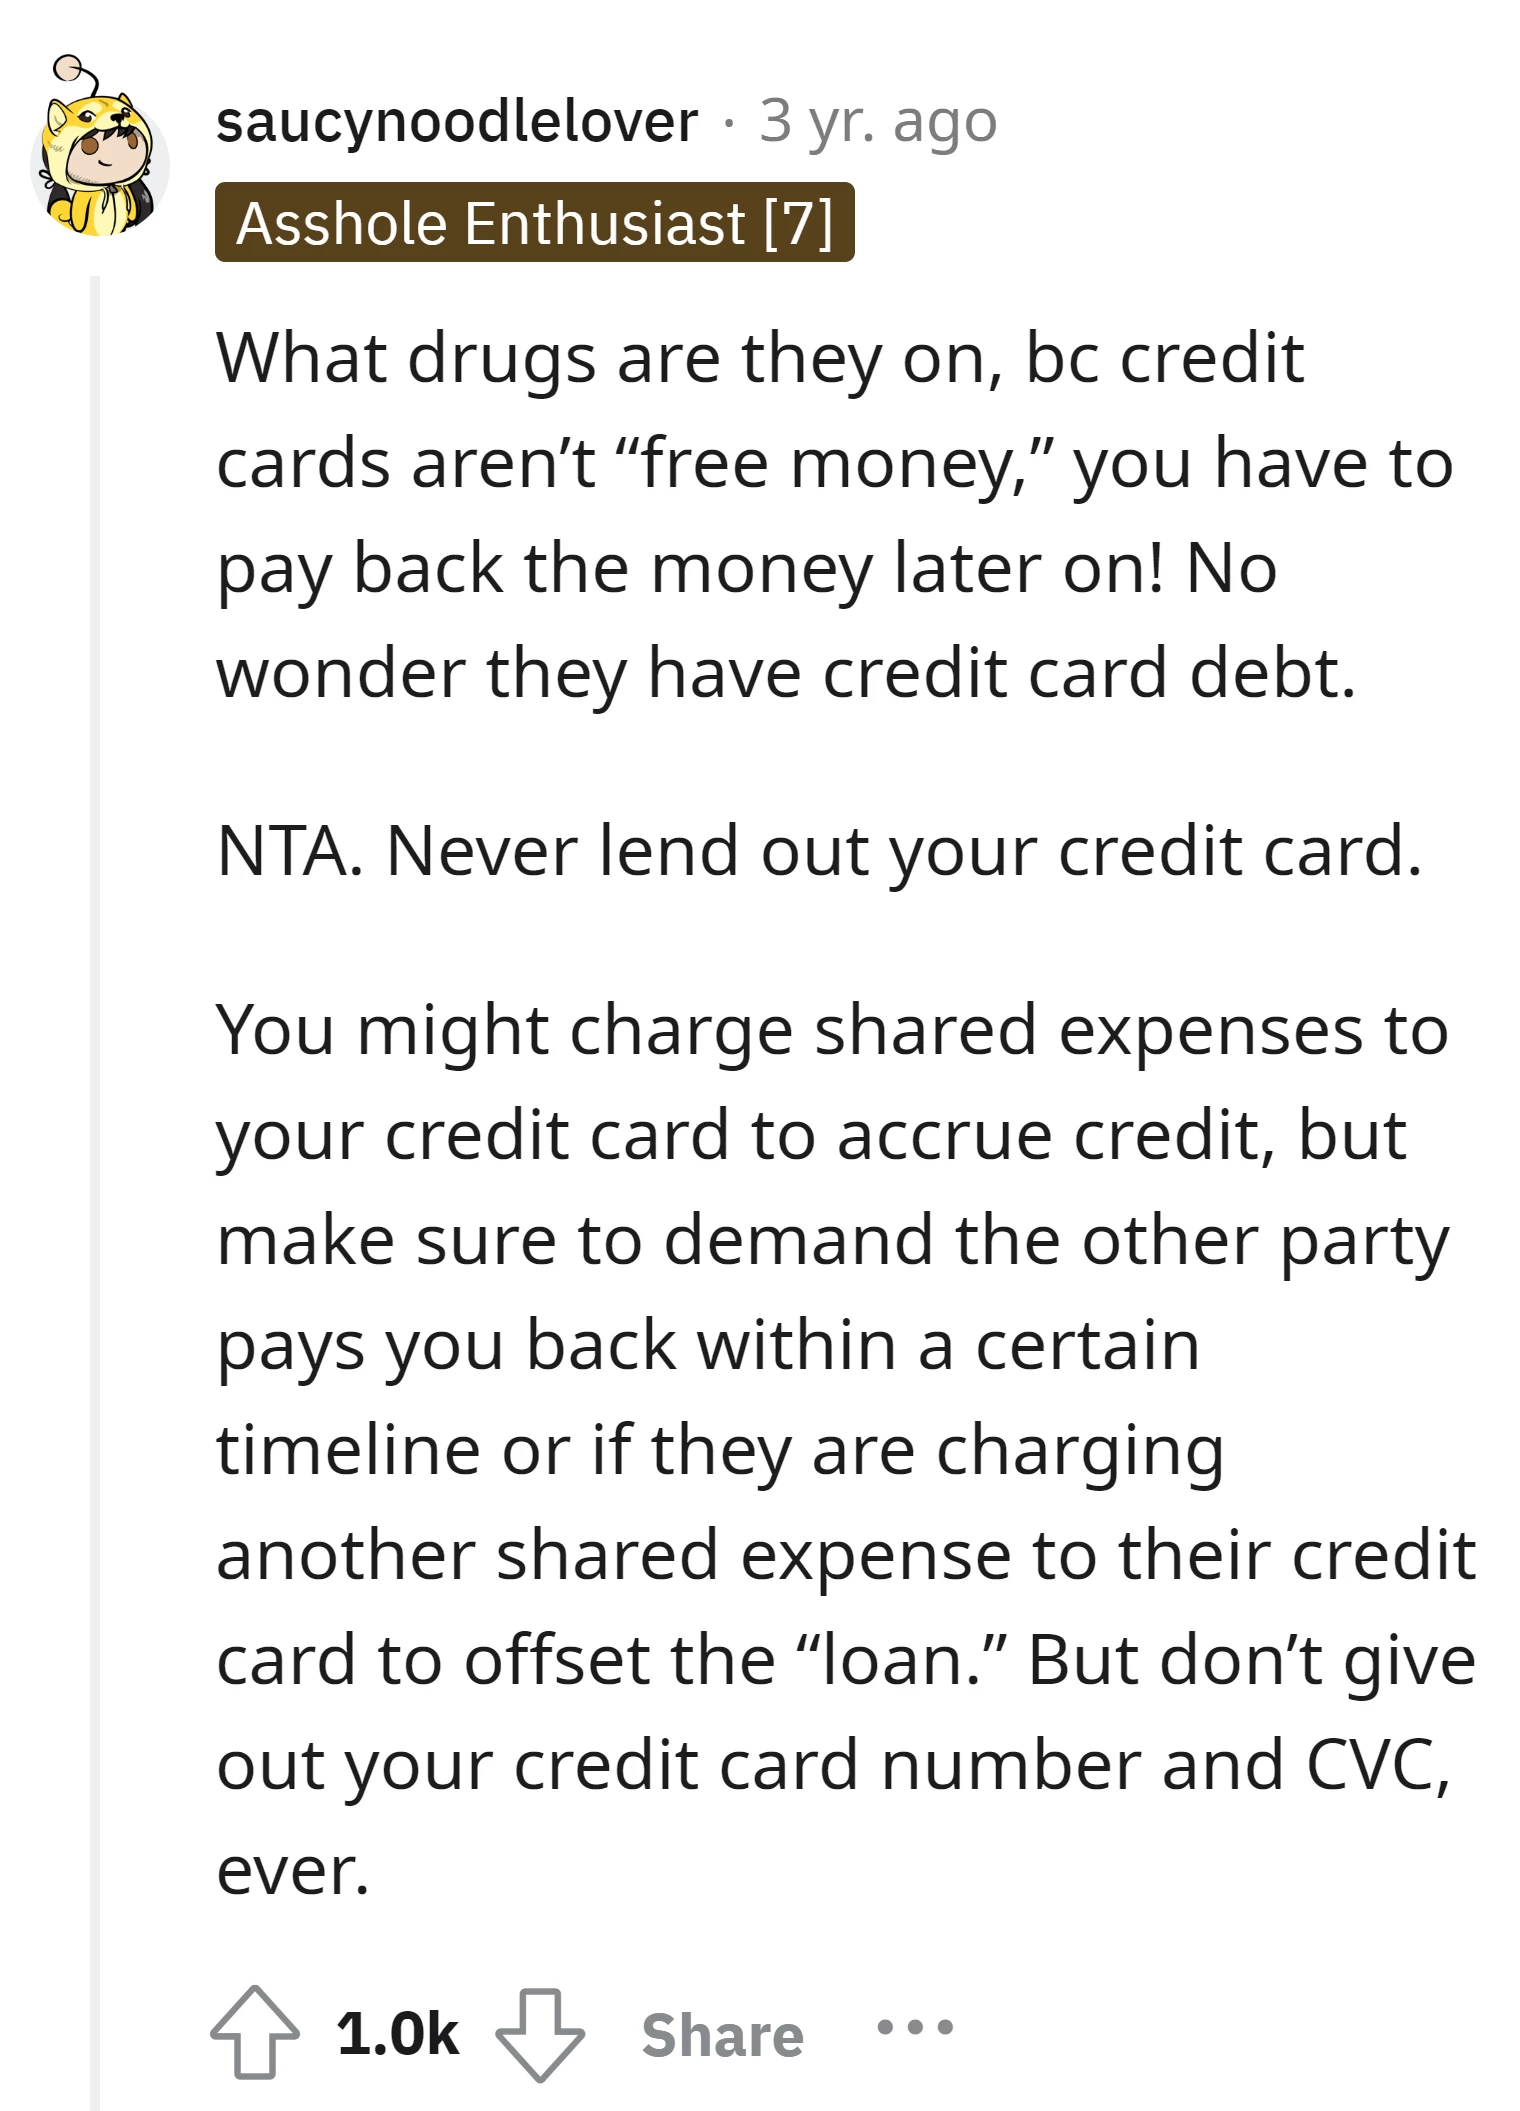 They're mistaken if they think credit cards are "free money"